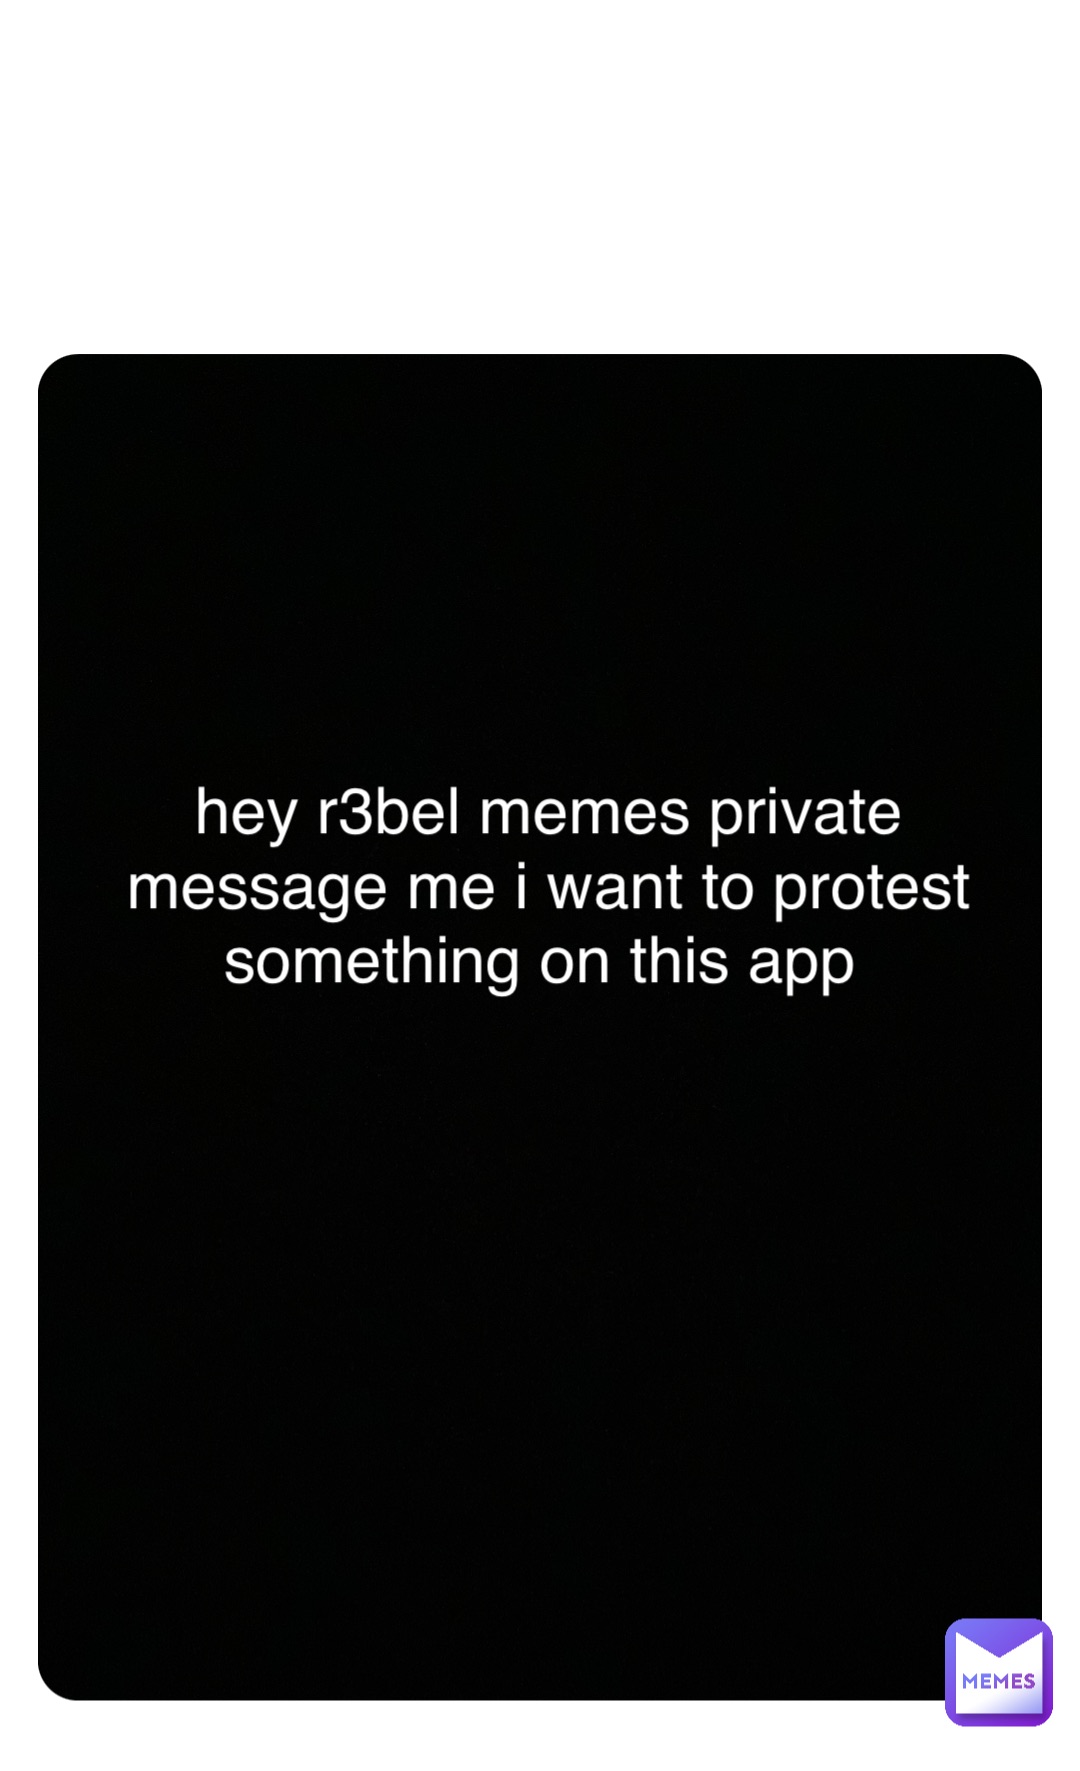 Double tap to edit hey r3bel memes private message me i want to protest something on this app